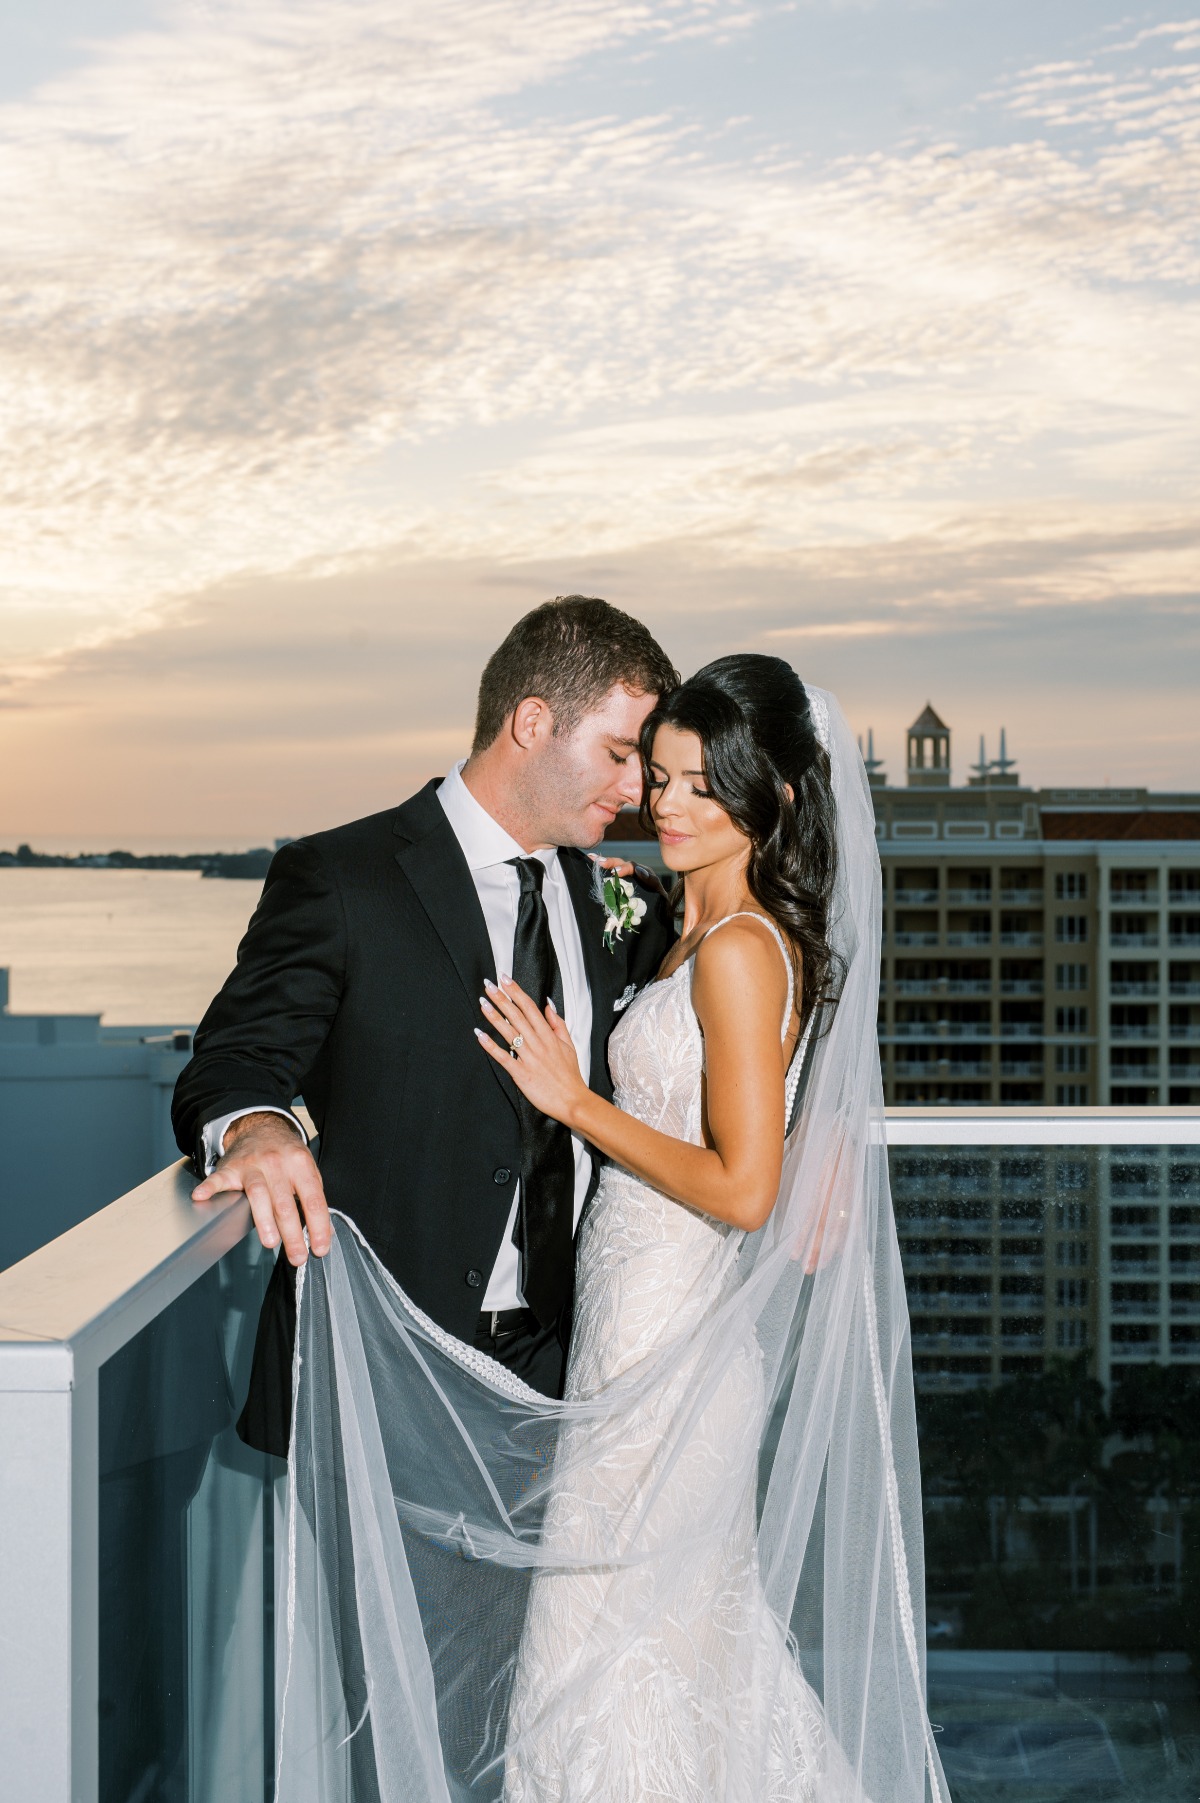 Sunset rooftop newlywed portraits